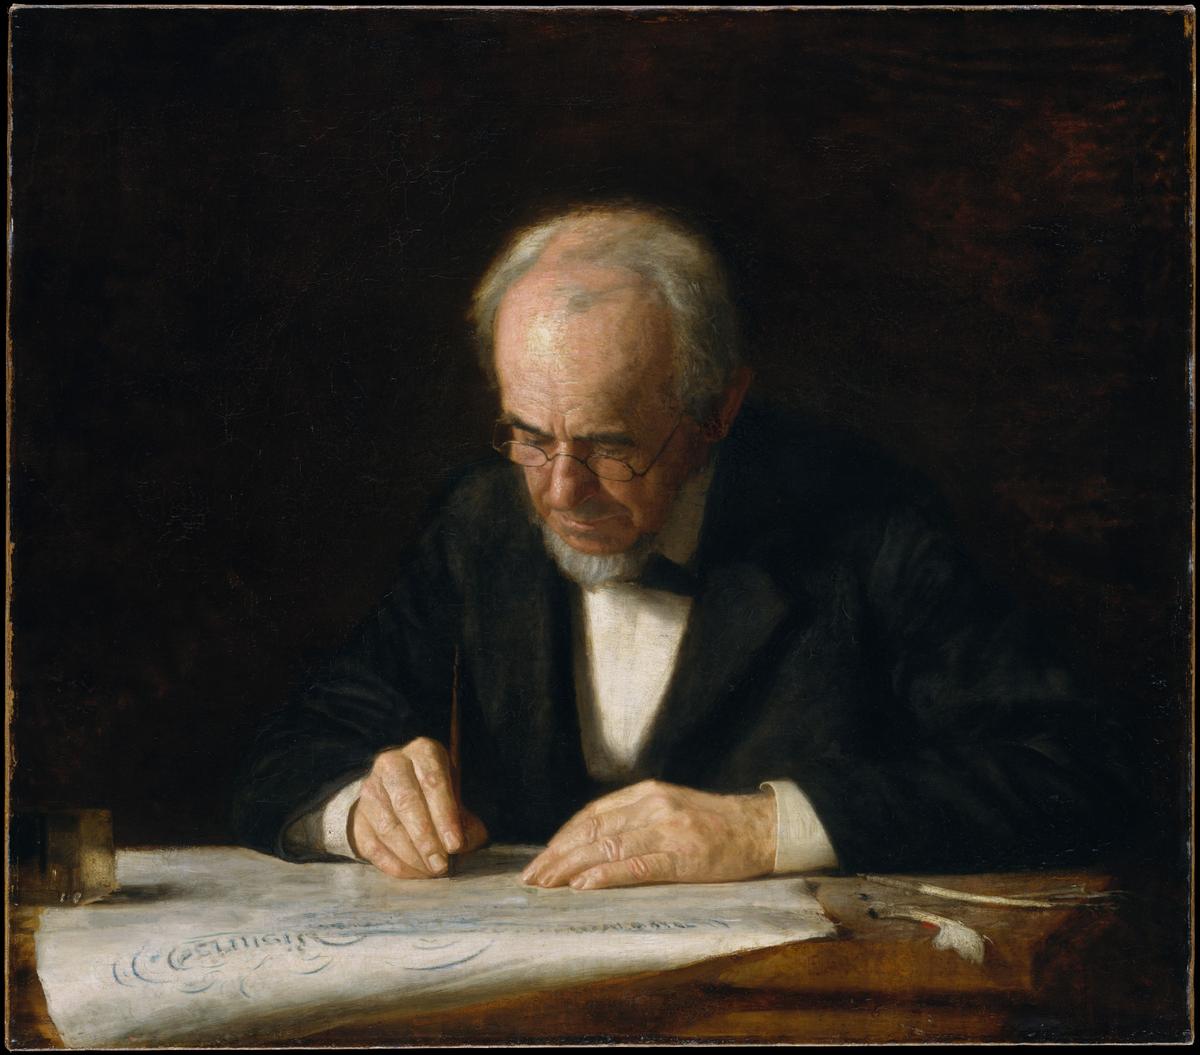 "The Writing Master," 1882, by Thomas Eakins. Oil on canvas; 30 inches by 34 1/4 inches. Metropolitan Museum of Art, New York. (Public Domain)